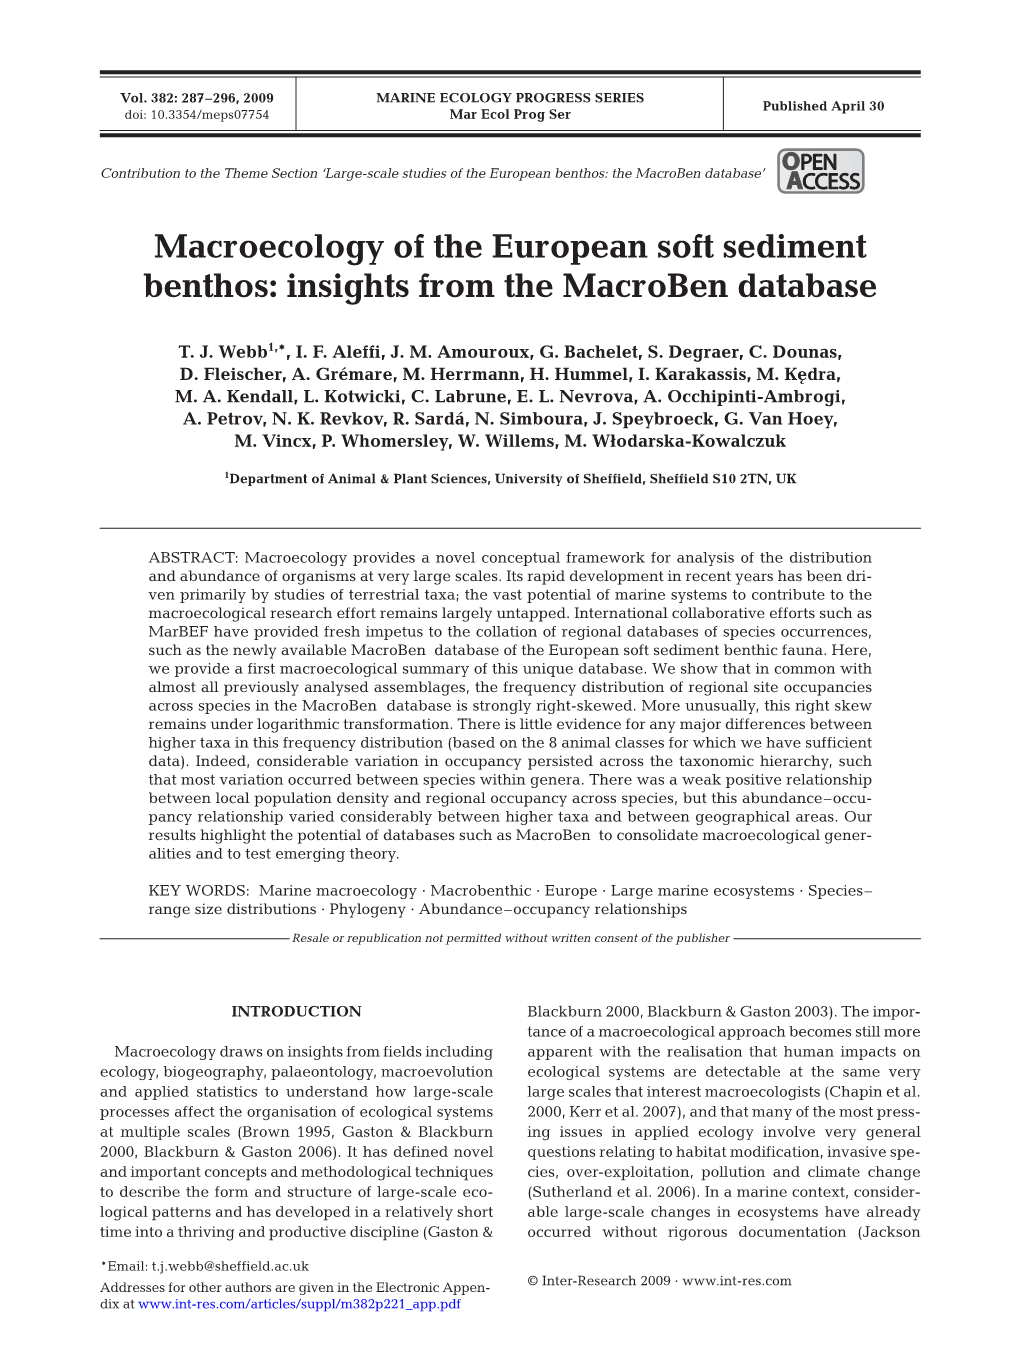 Macroecology of the European Soft Sediment Benthos: Insights from the Macroben Database